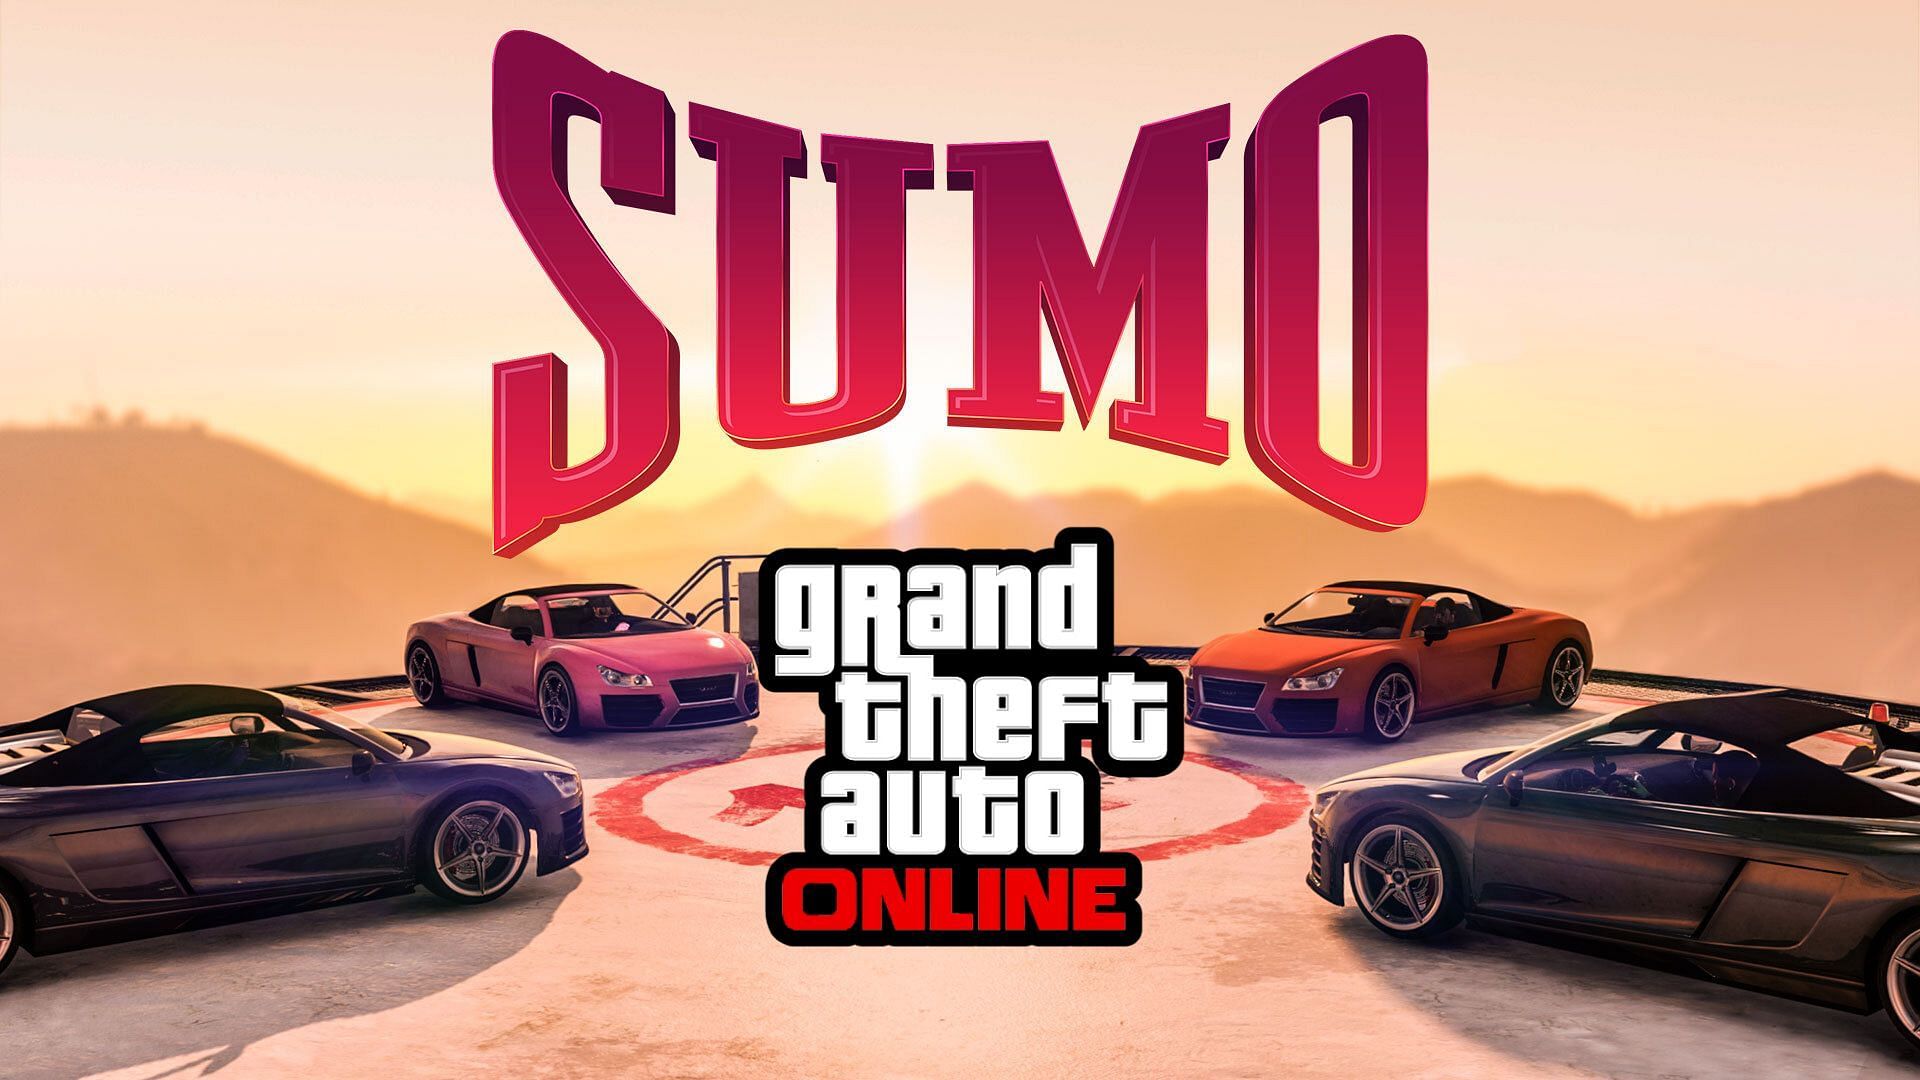 How to play GTA Online Sumo Adversary Mode for 2x bonuses? (November 30 to December 11)